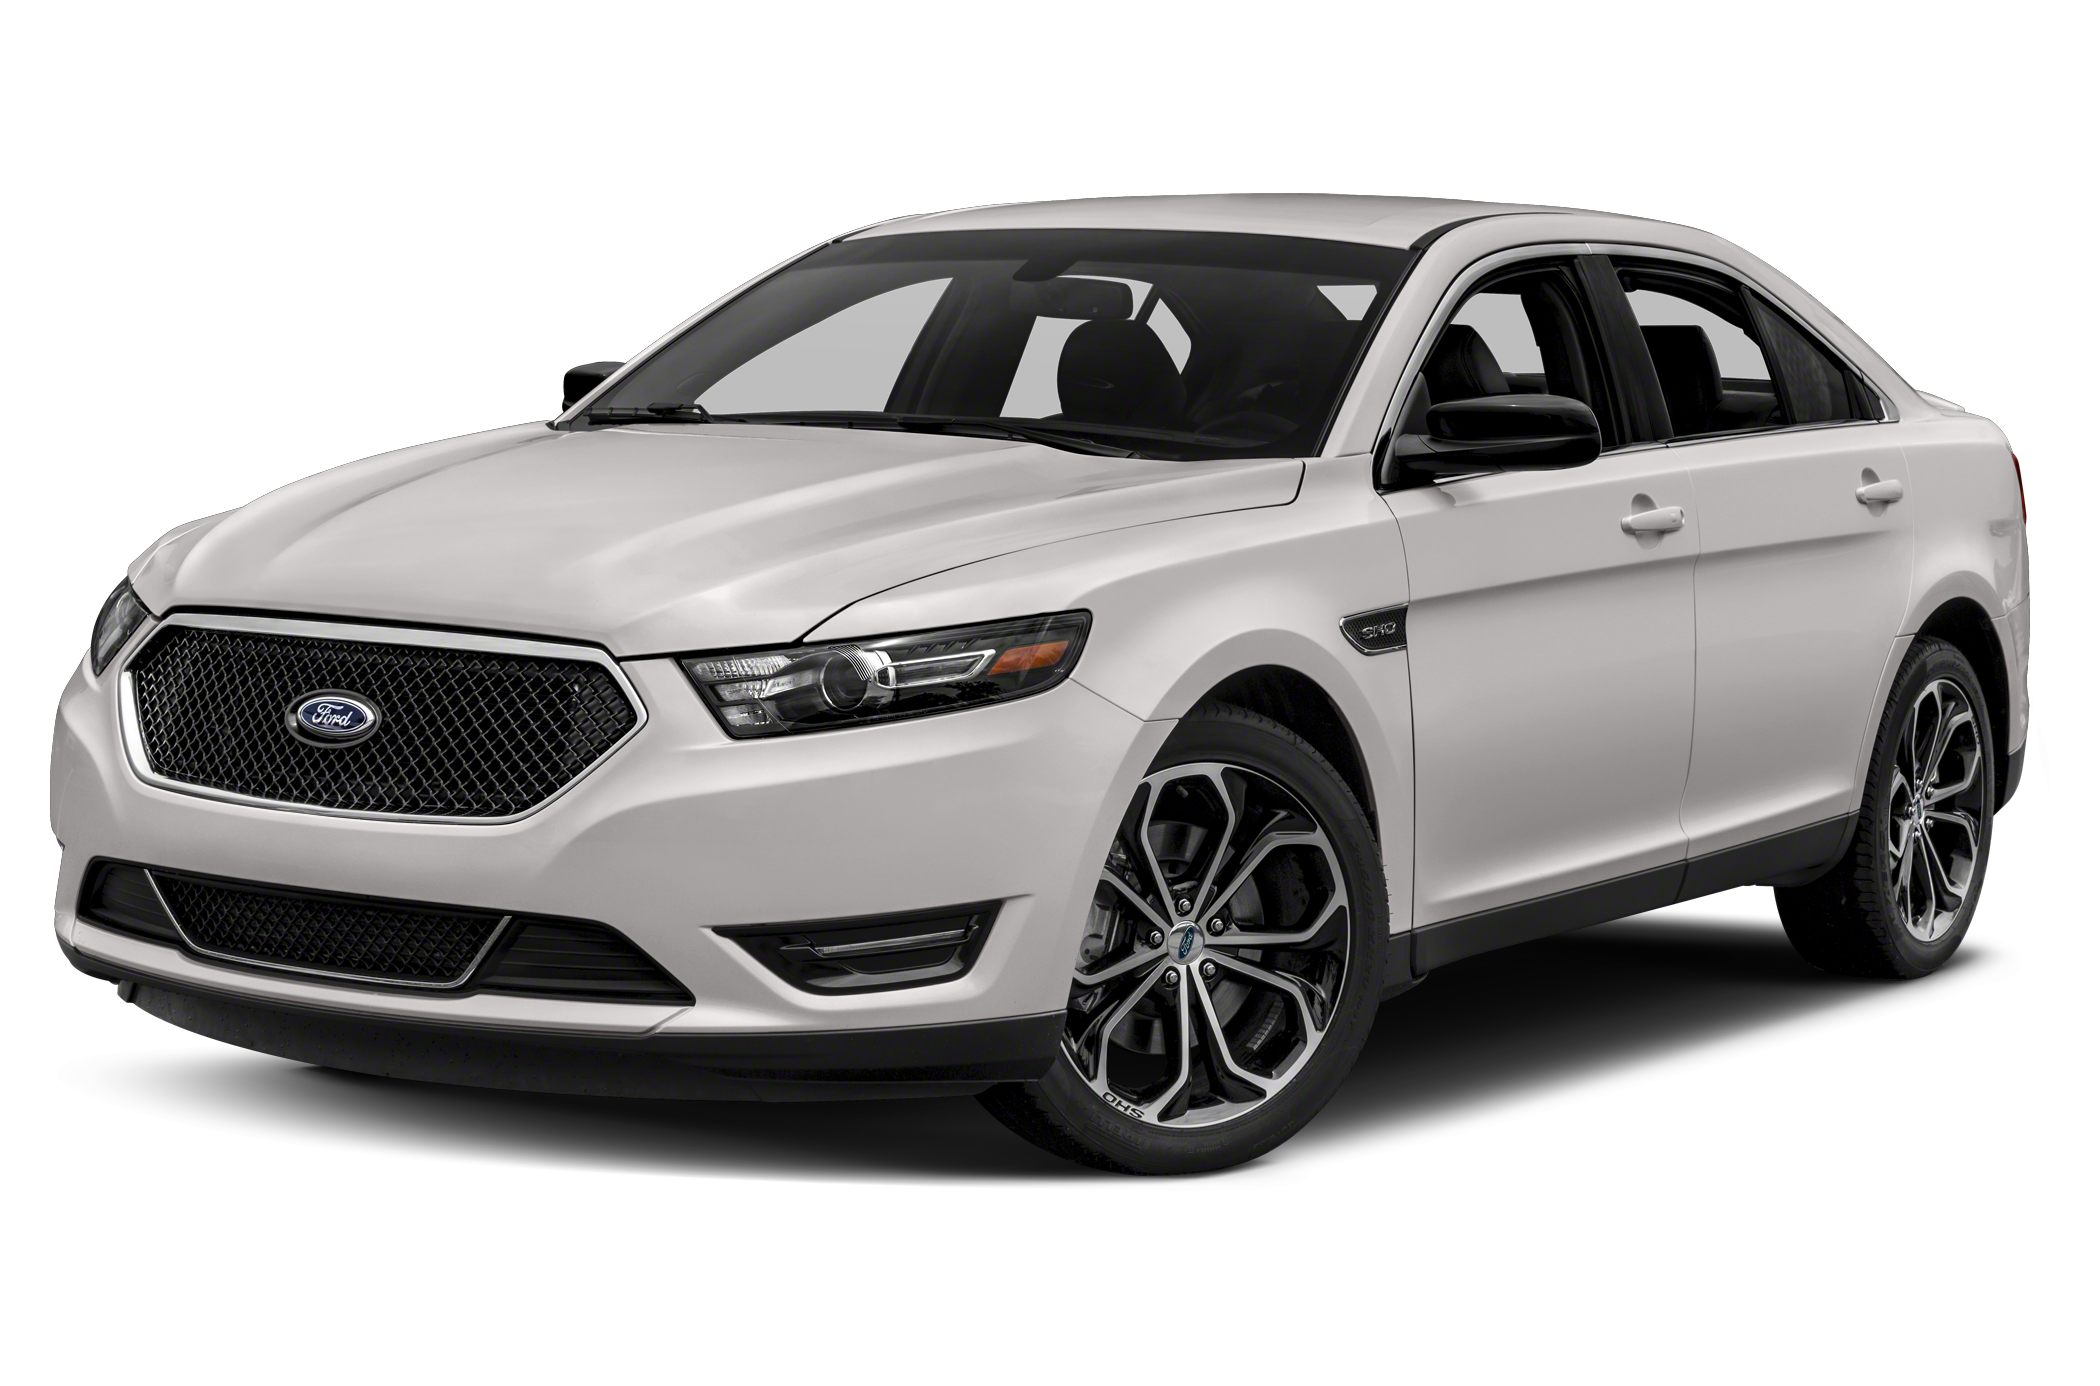 Ford Taurus Sho Wallpapers